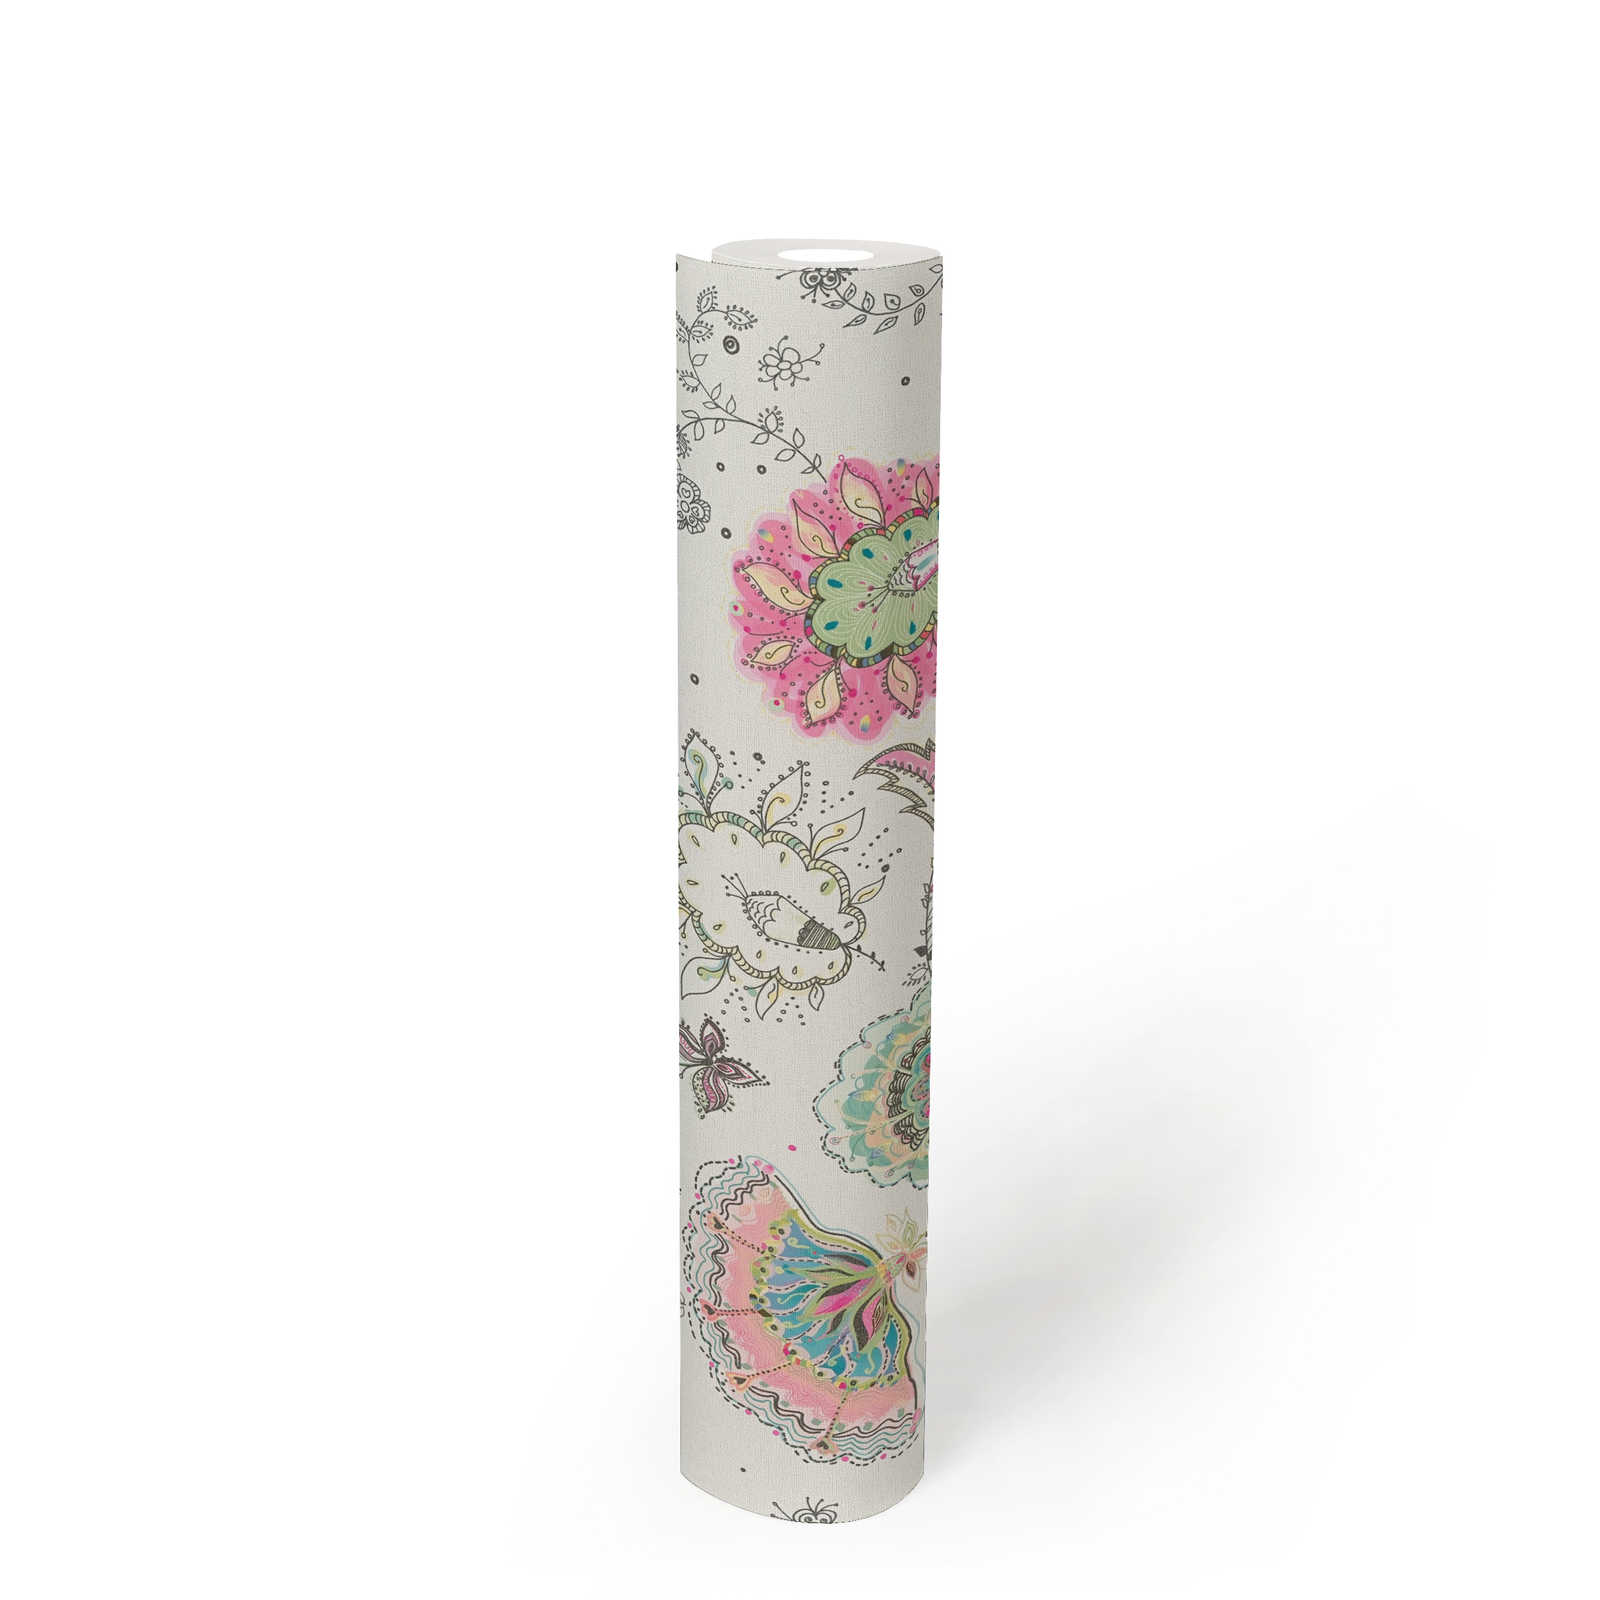             Floral pattern wallpaper in bold colours - cream, green, pink
        